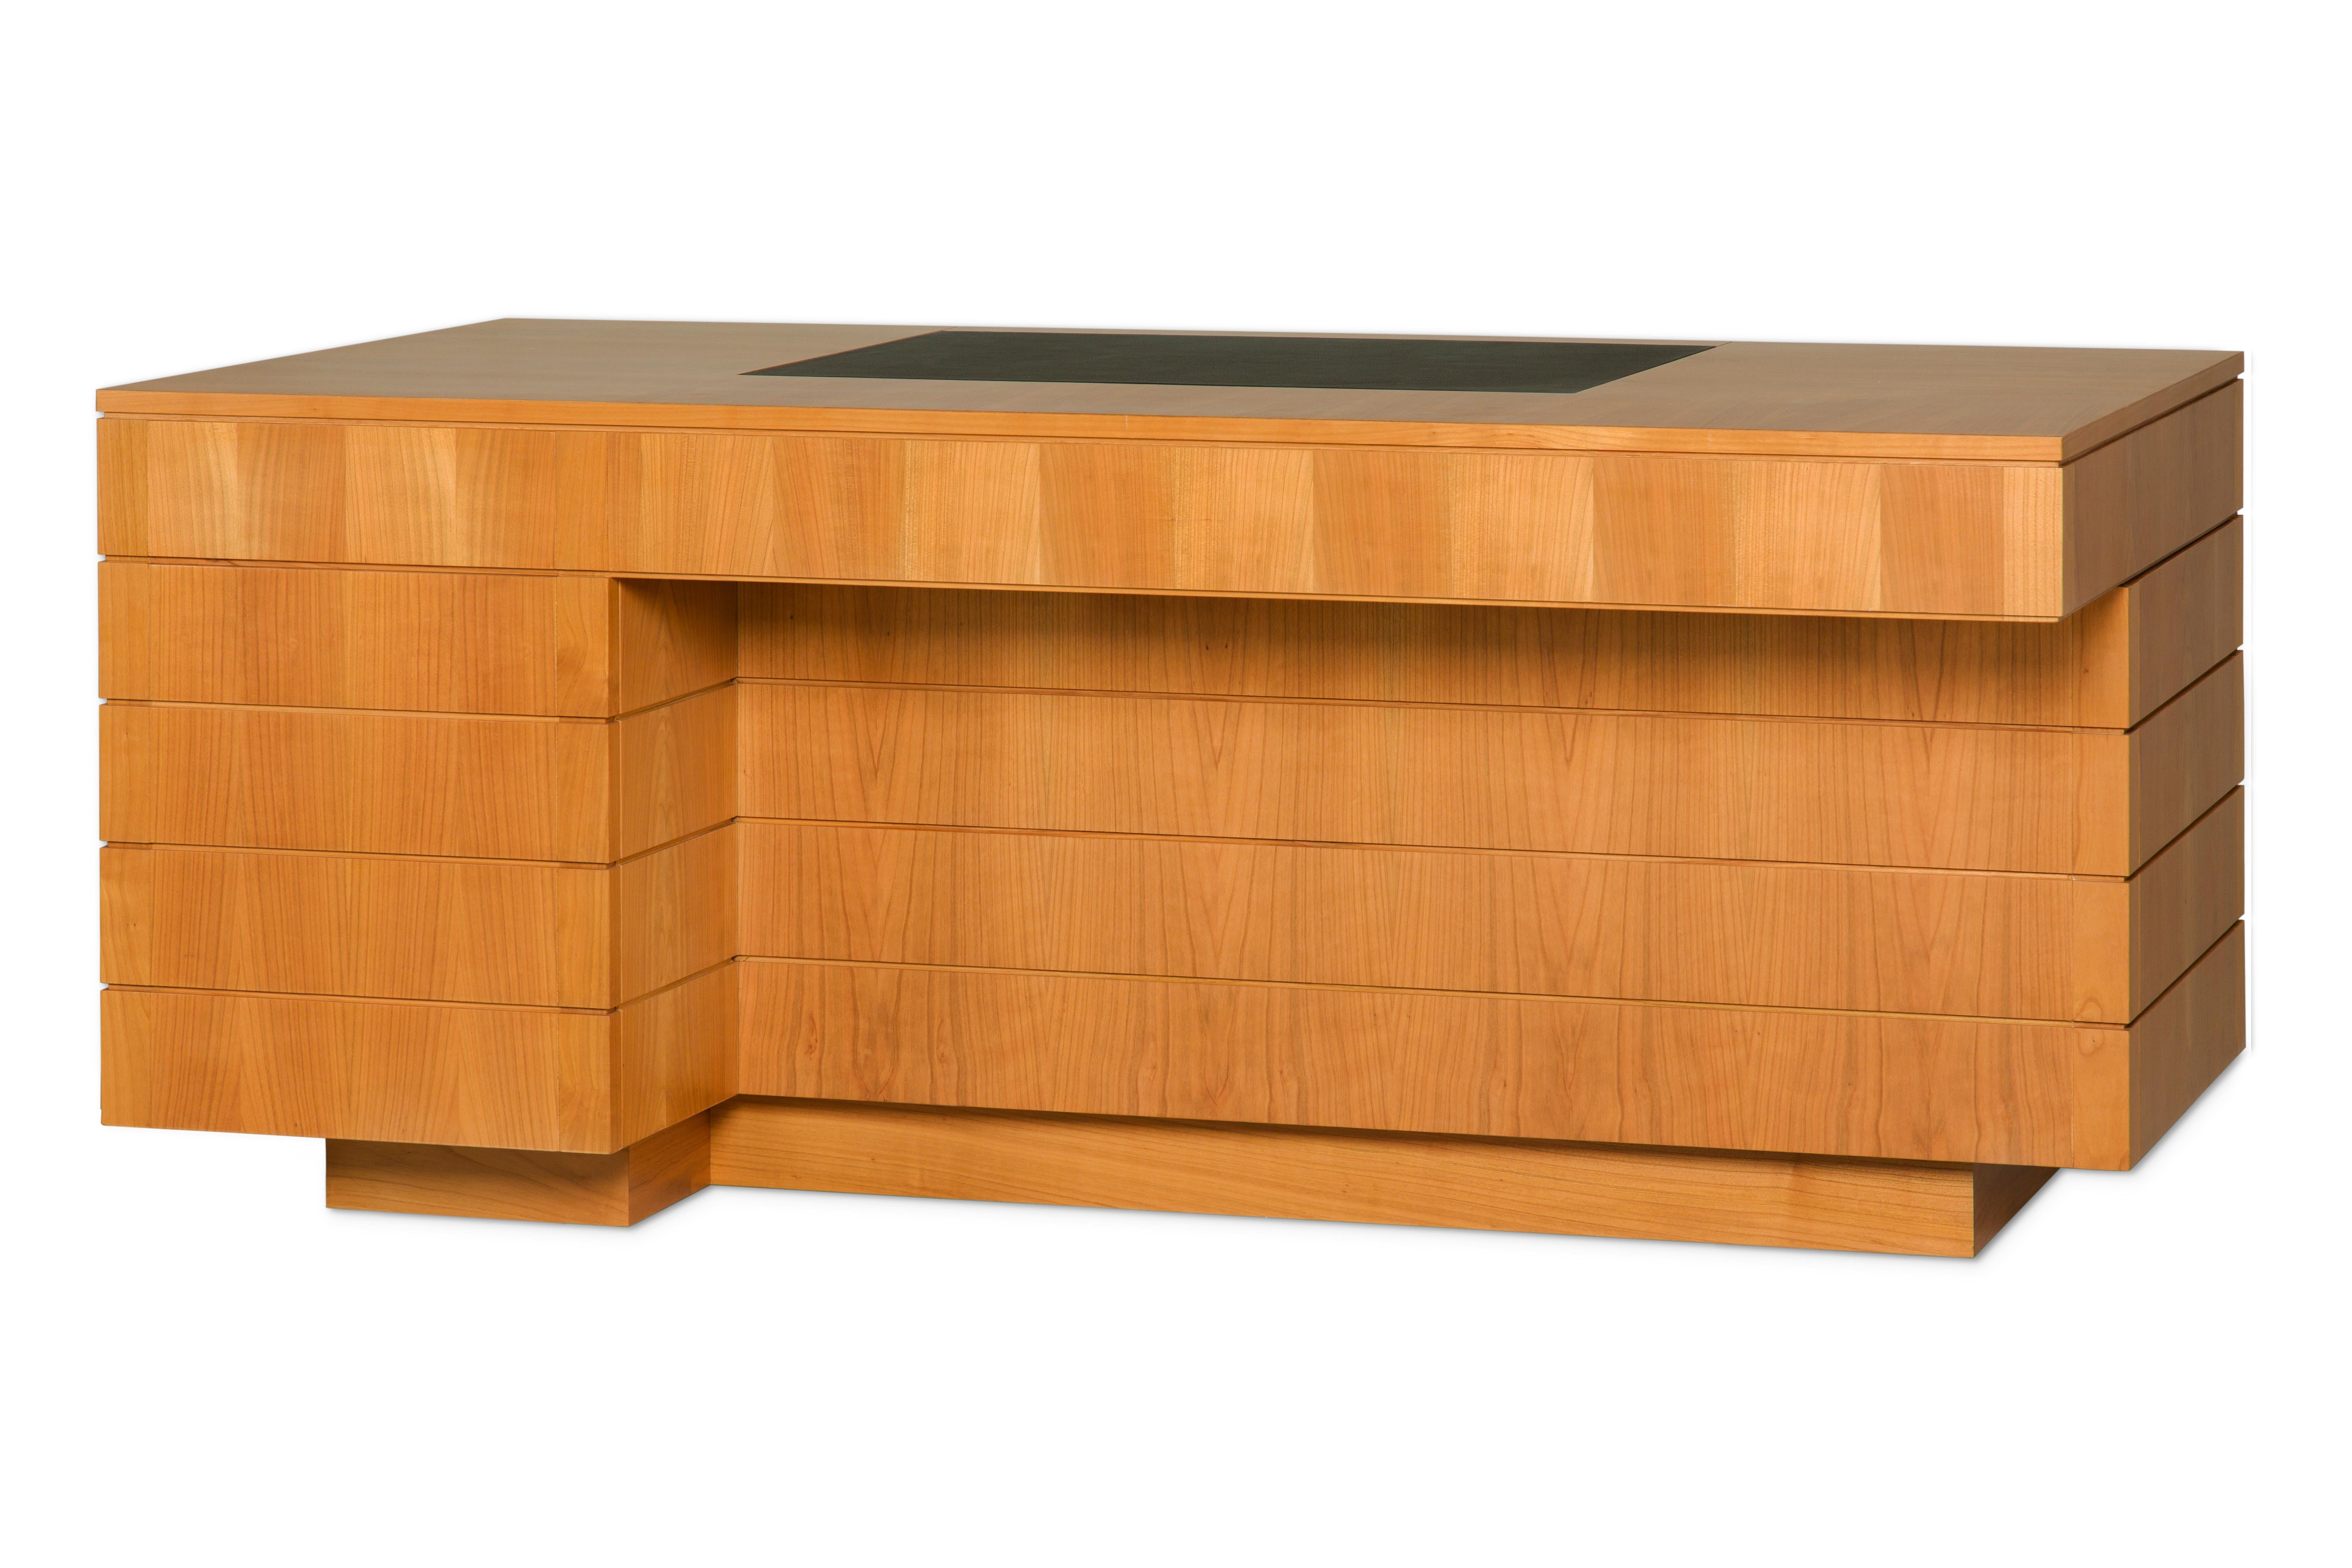 '900 Style Wooden Desk in Cherry Wood with Leather Top and Drawers, by Morelato 4